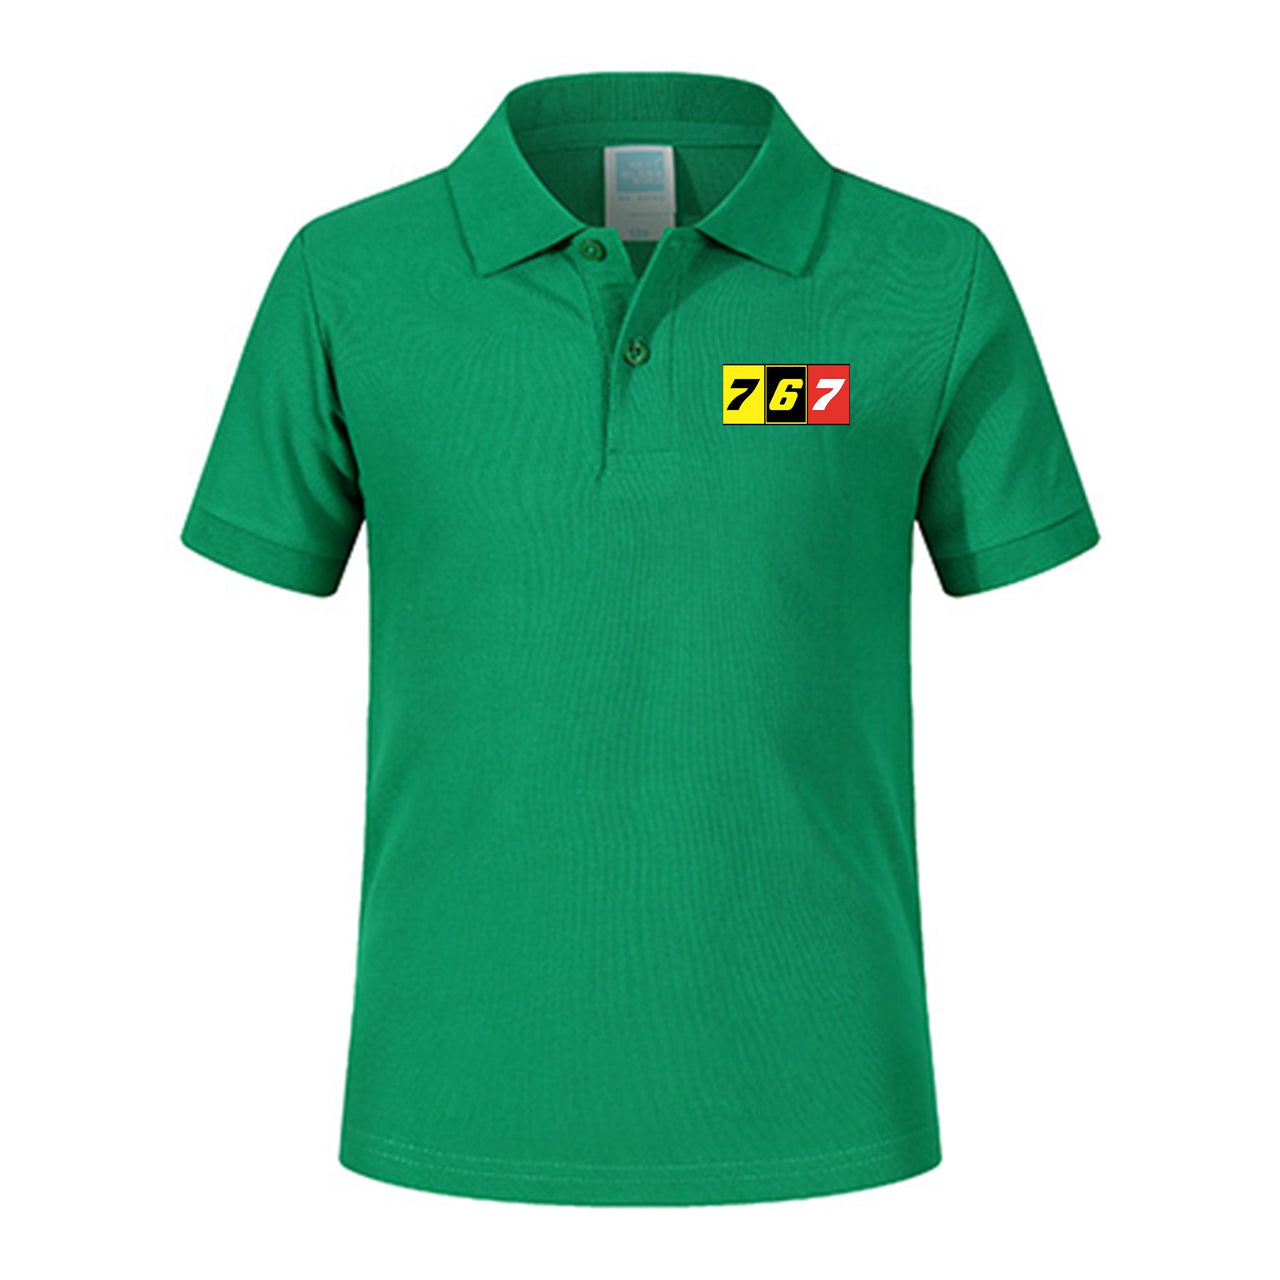 Flat Colourful 767 Designed Children Polo T-Shirts